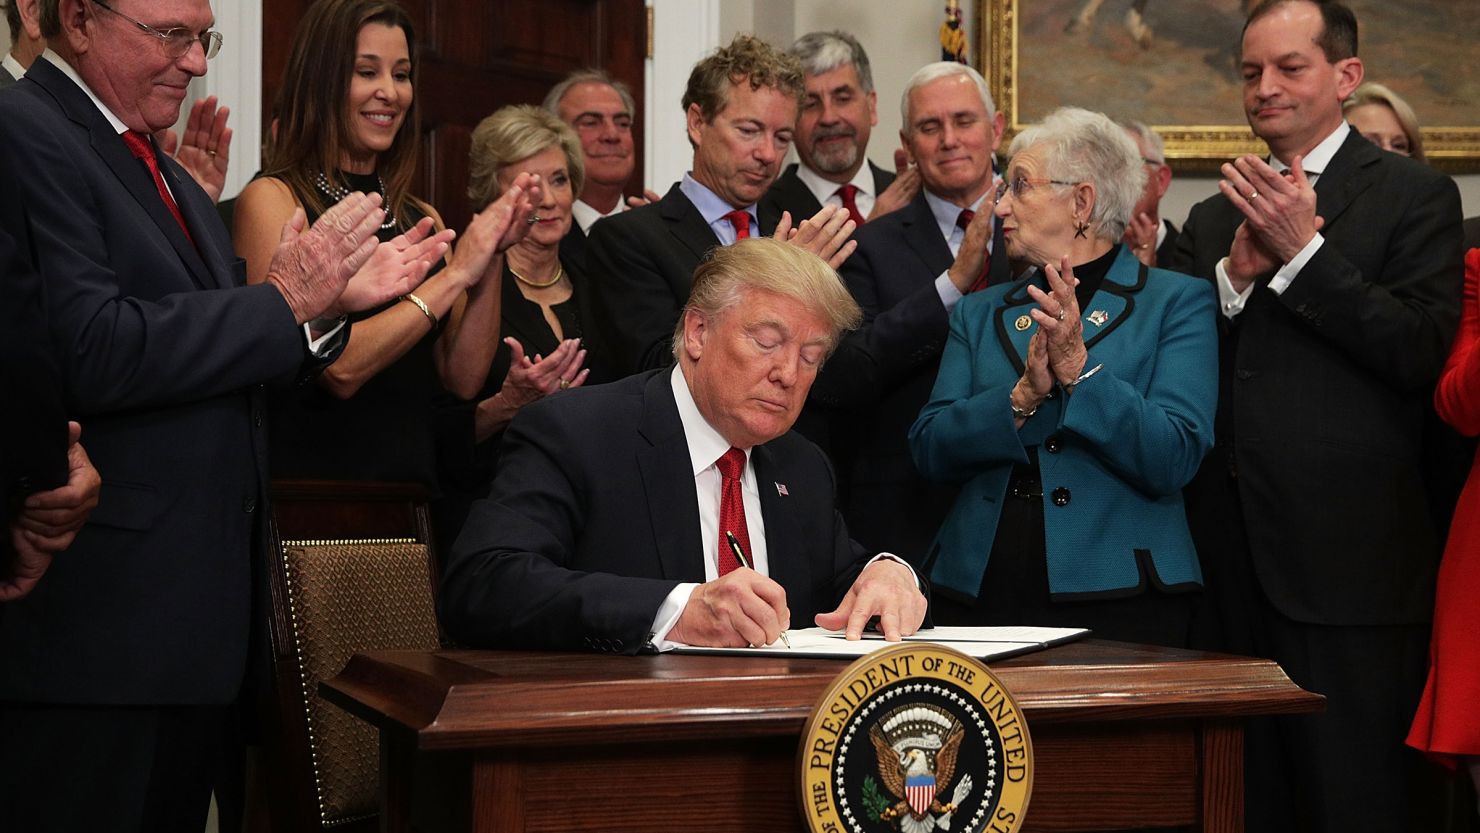 Former President Donald Trump signs an executive order in October 2017 in an effort to weaken the Affordable Care Act.